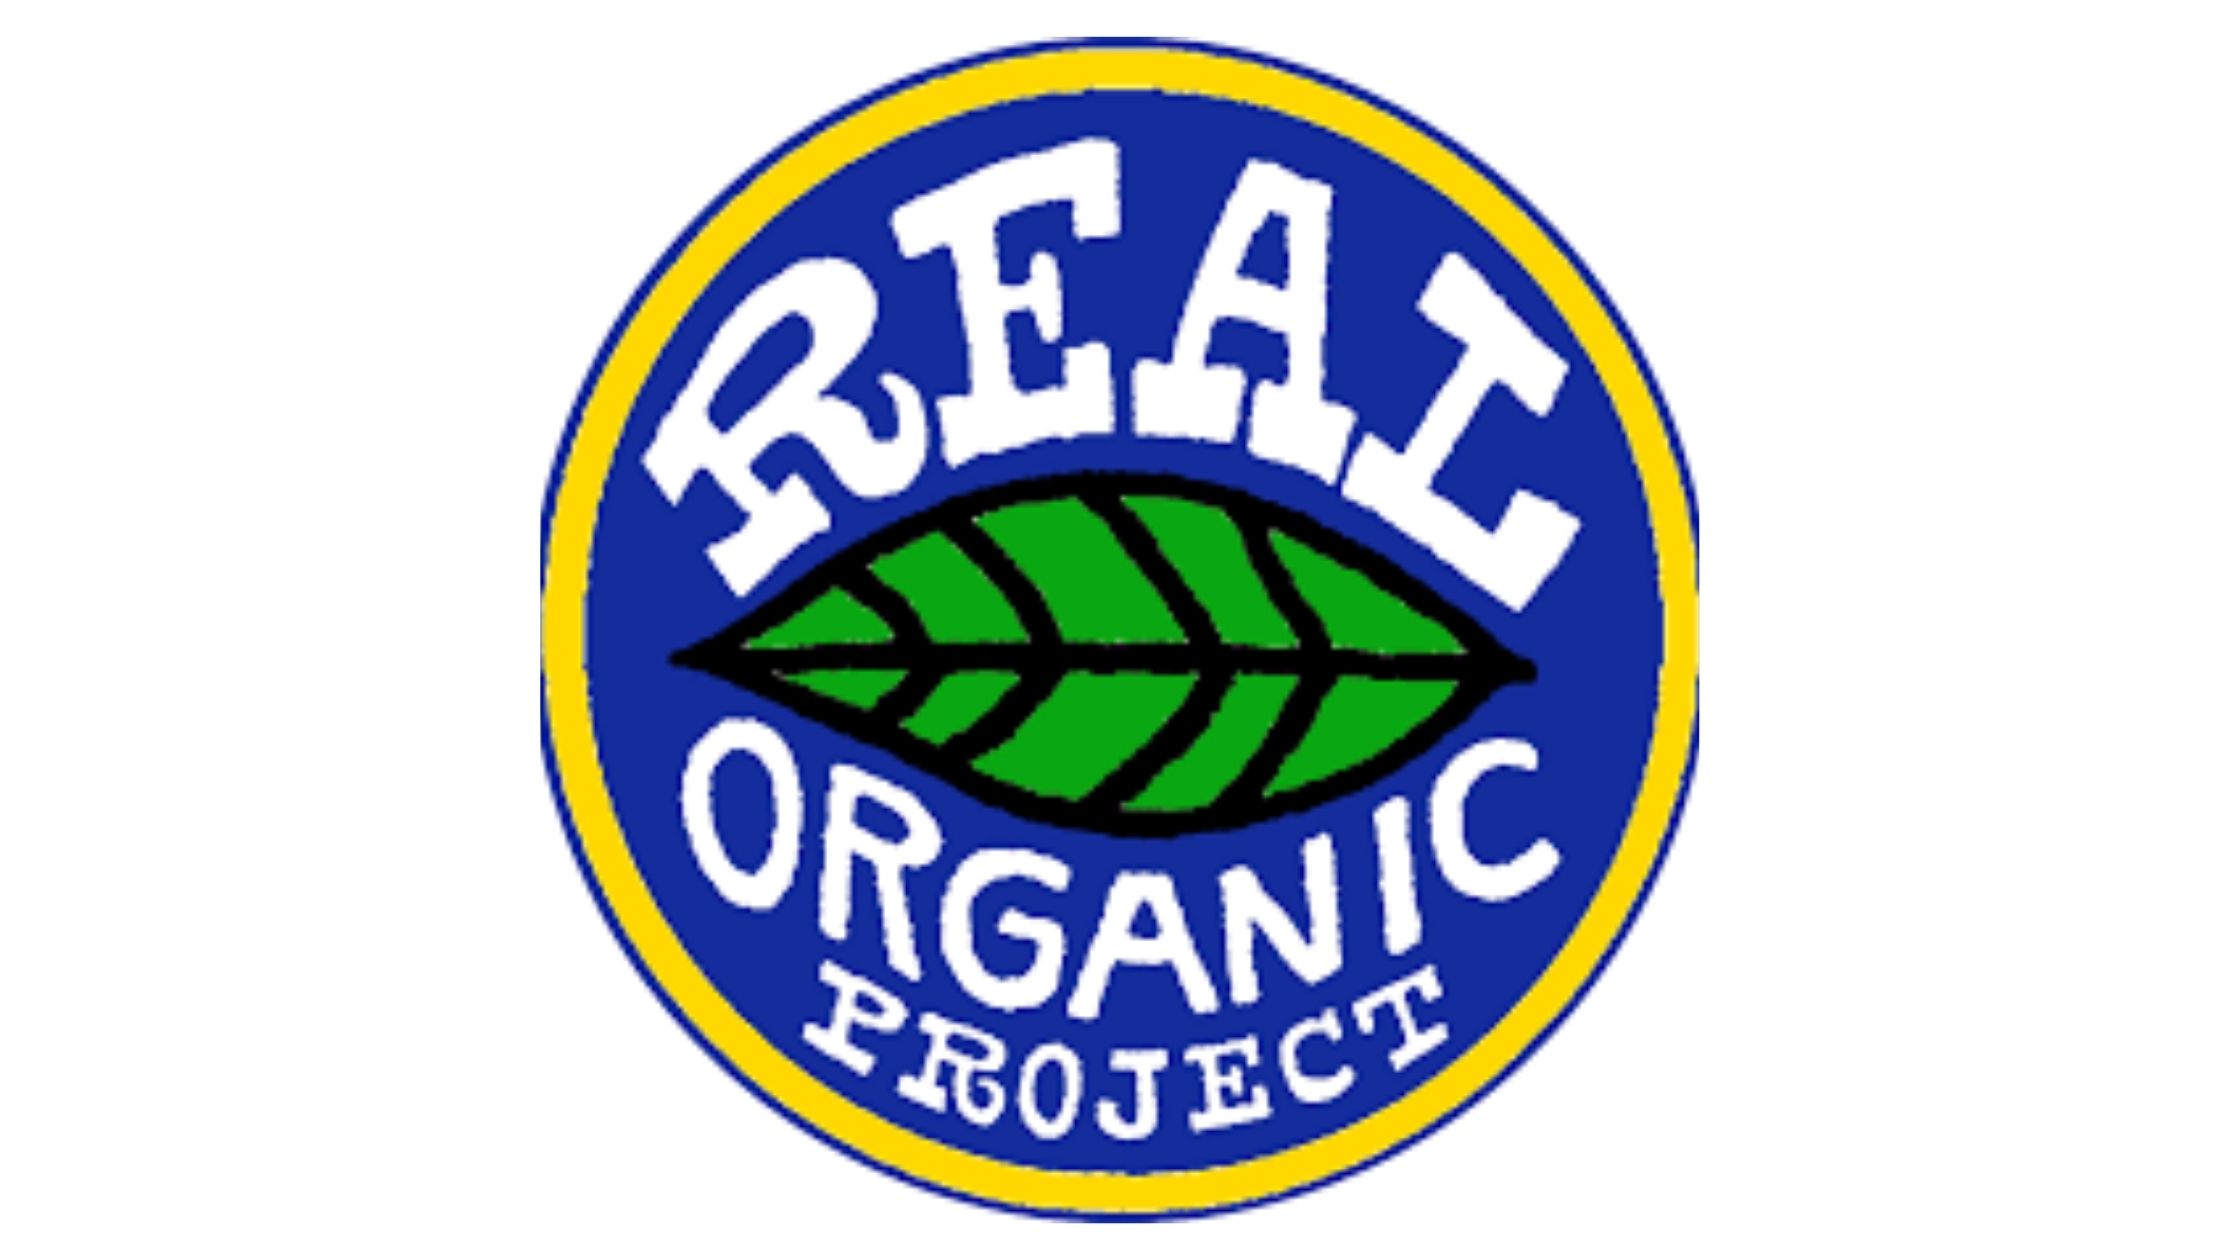 What Is The Real Organic Project?